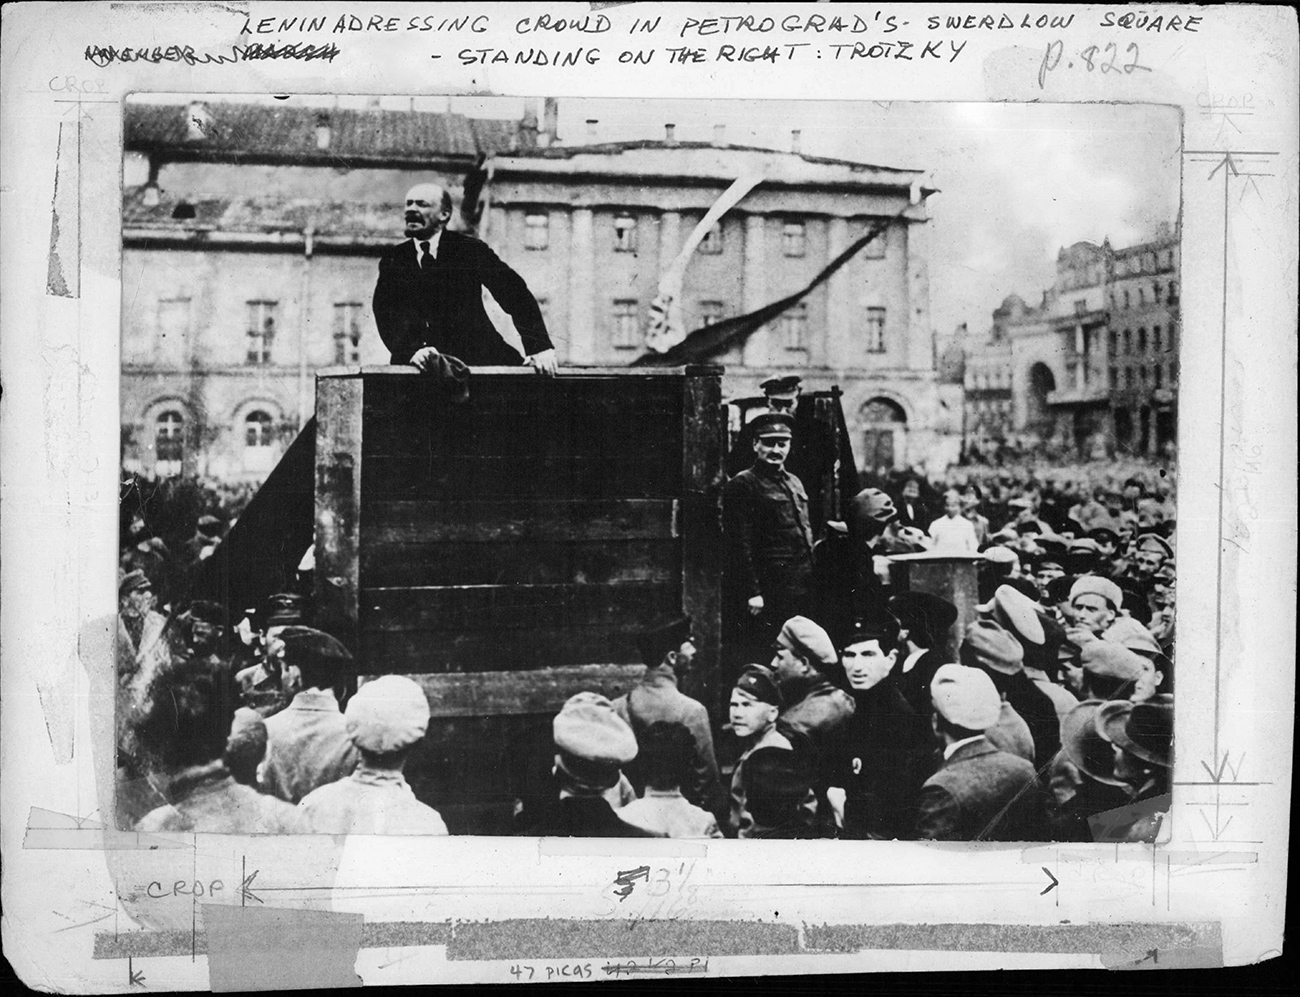 Lenin Addressing Crowd In Petrograd's Swerdlow Square 1919 - standing on the right - Trotzky.